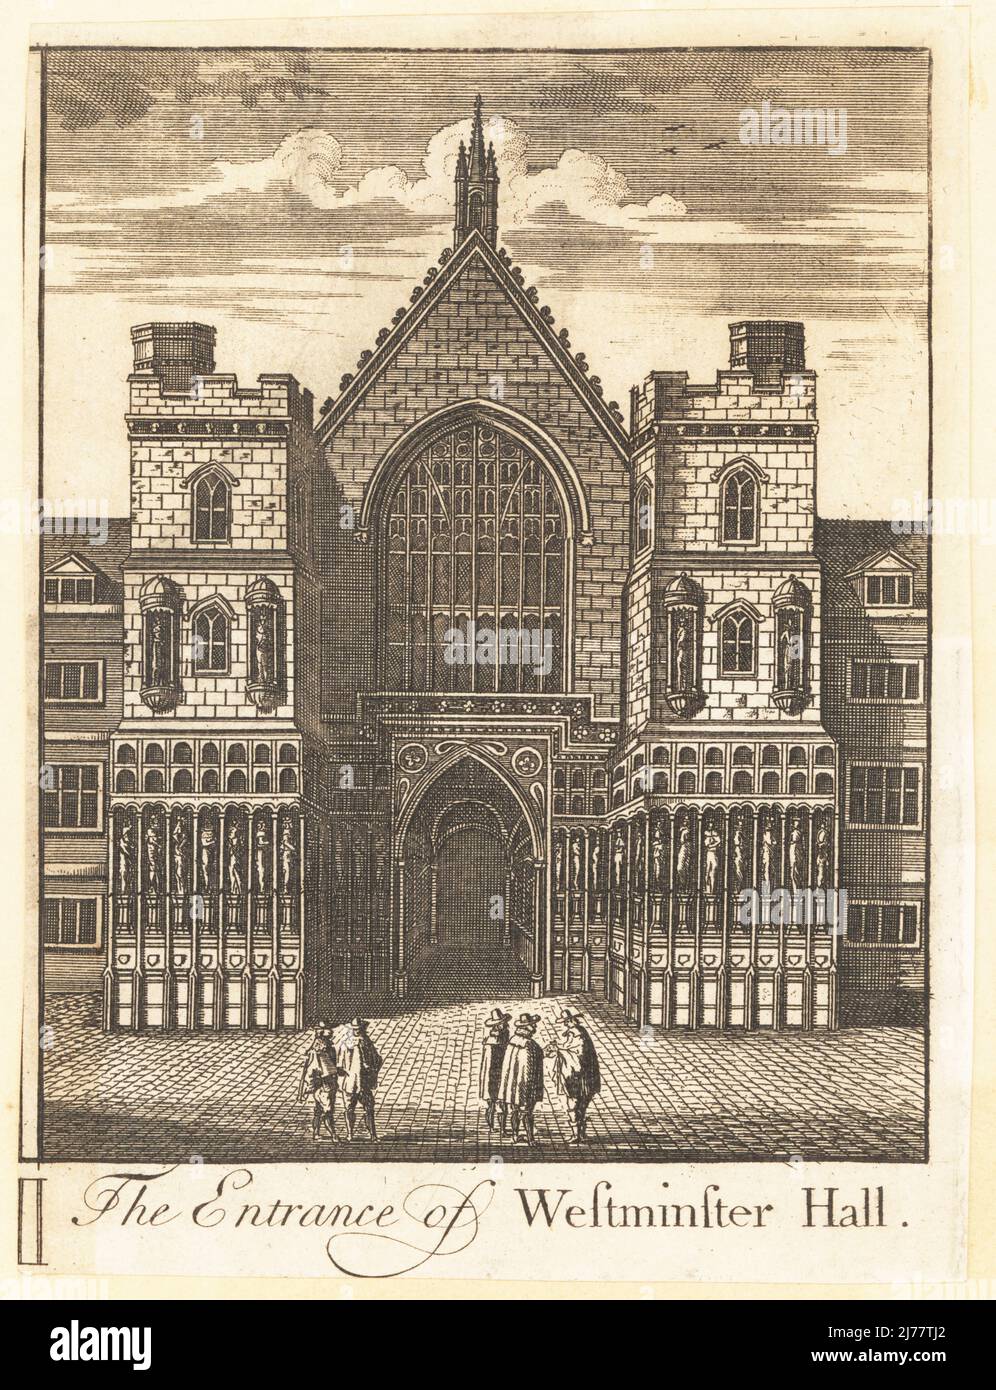 The Entrance of Westminster Hall, 18th century. View of the arched entrance porch to the Gothic style hall; statues of kings of England from Edward the Confessor to Richard II in niches in the walls of the towers to either side. Copperplate engraving by an unknown artist, published in London, circa 1720. Stock Photo